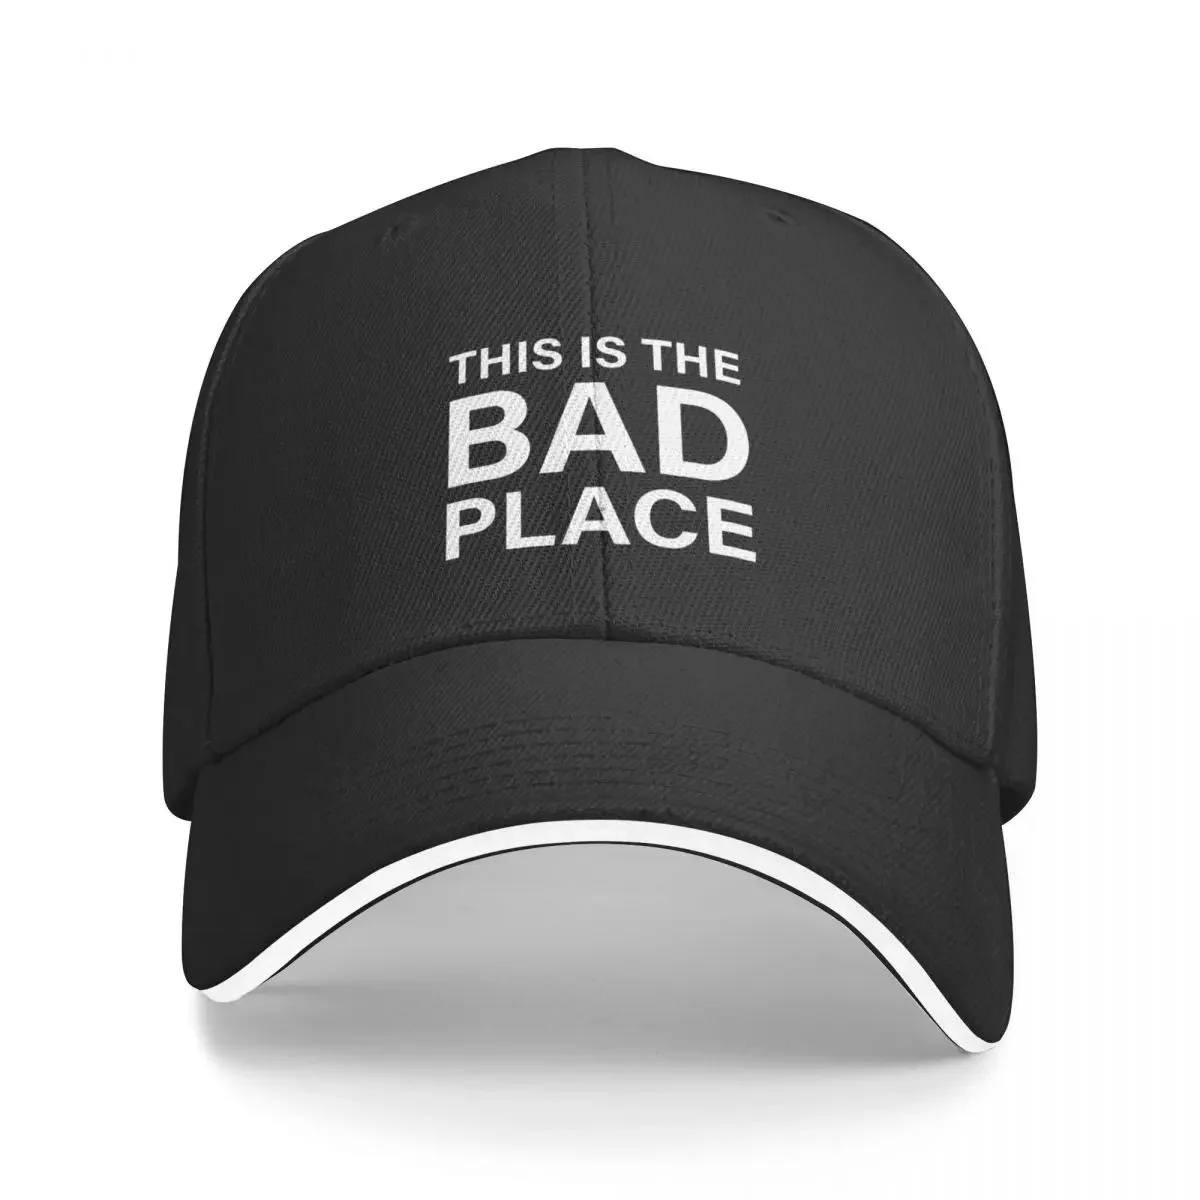 

This Is The Bad Place (Black) Bucket Hat Baseball Cap Sunscreen Bobble hat caps for women Men's